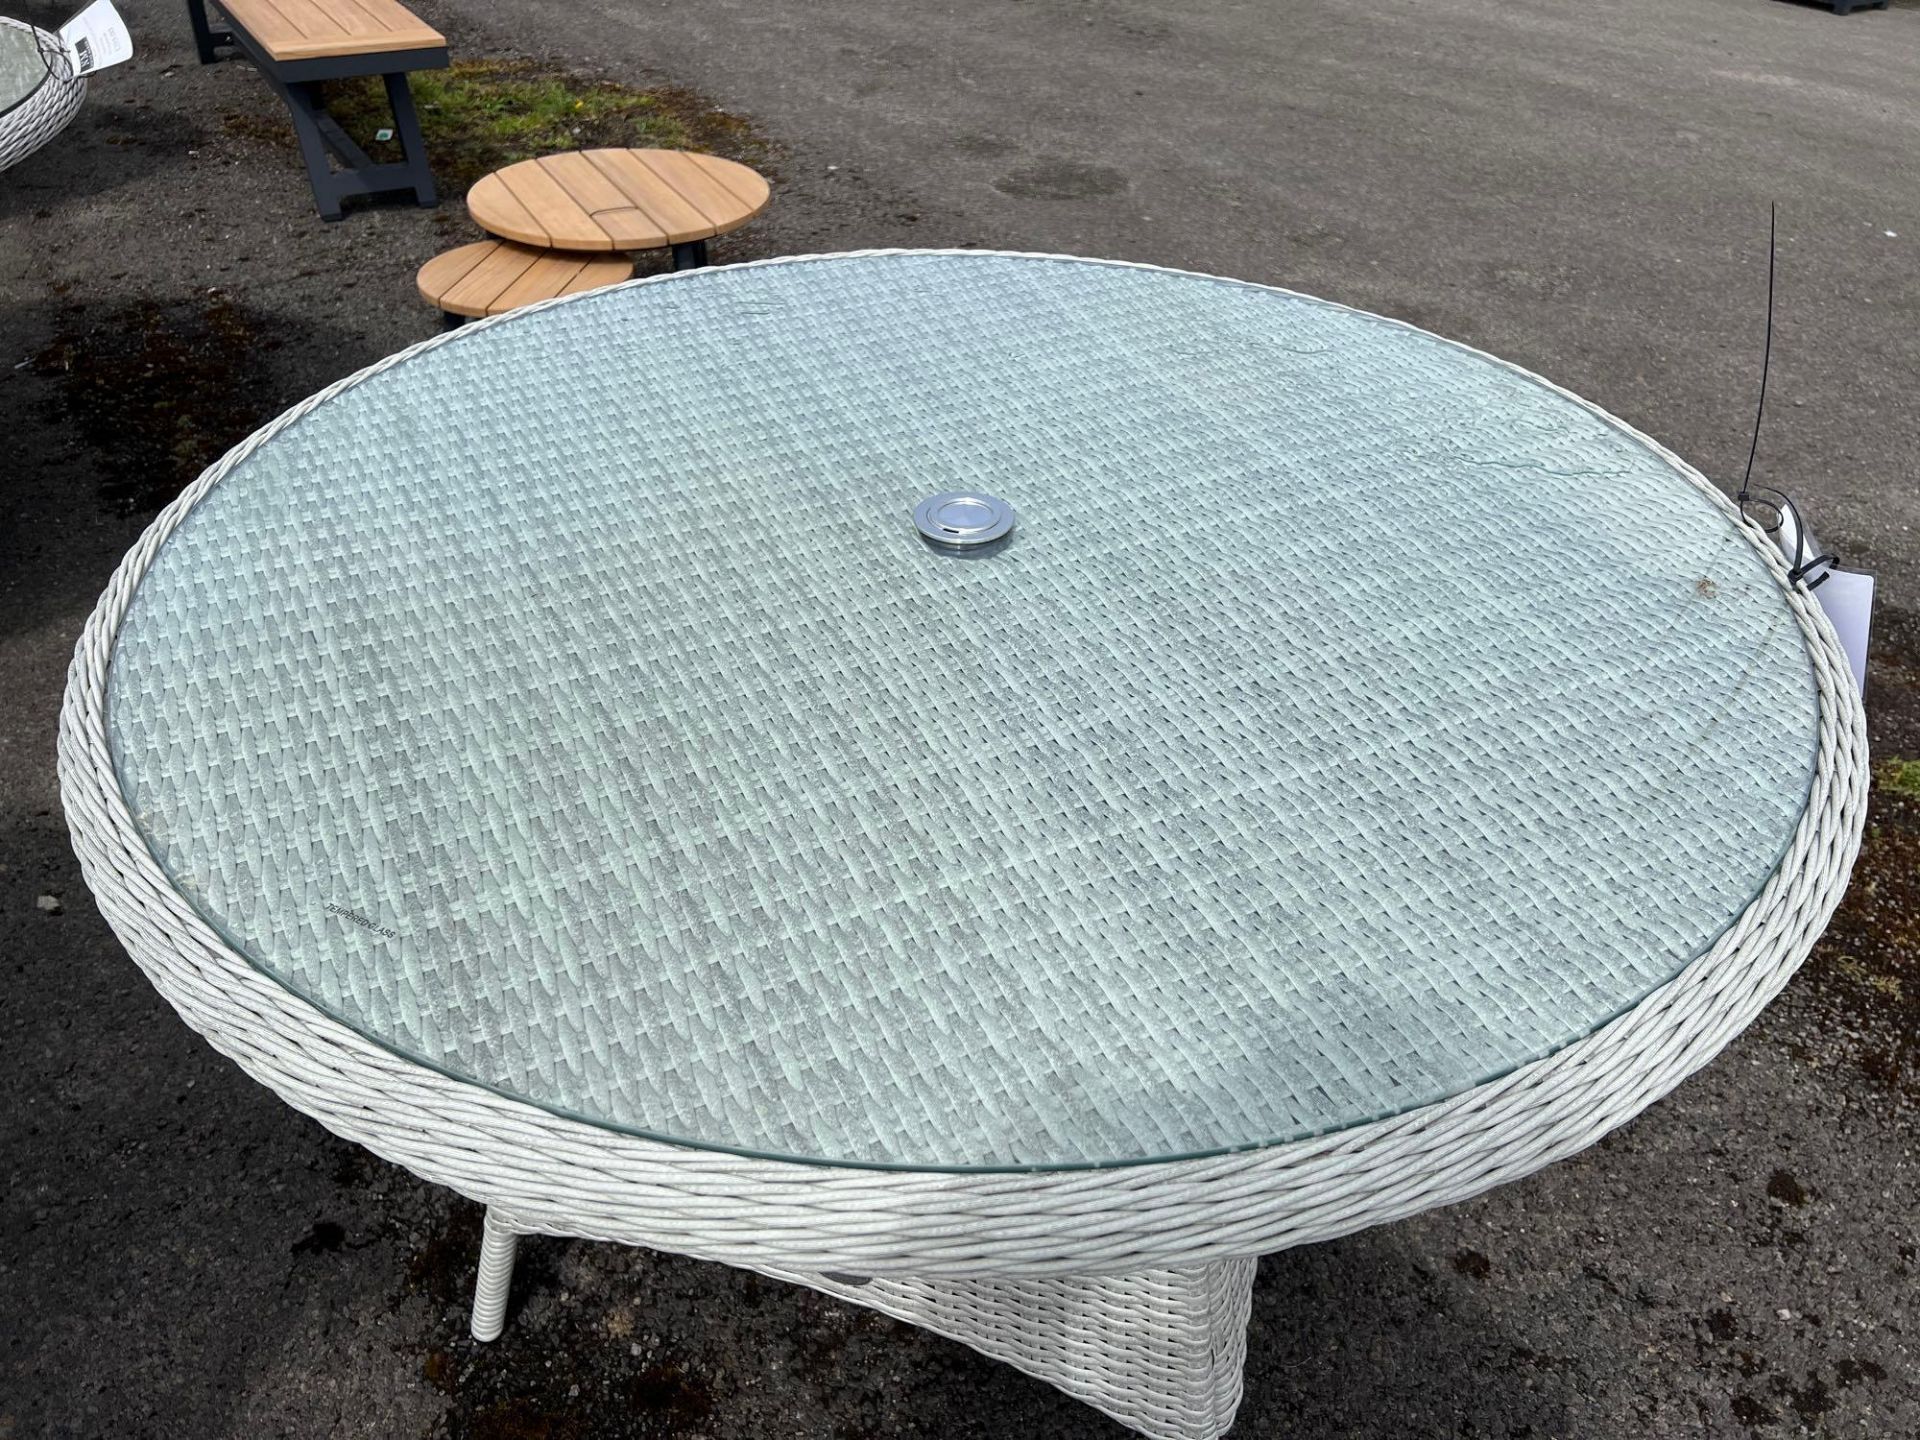 A215 Chedworth 120cm Round Dining Table Dove Grey - Image 2 of 3